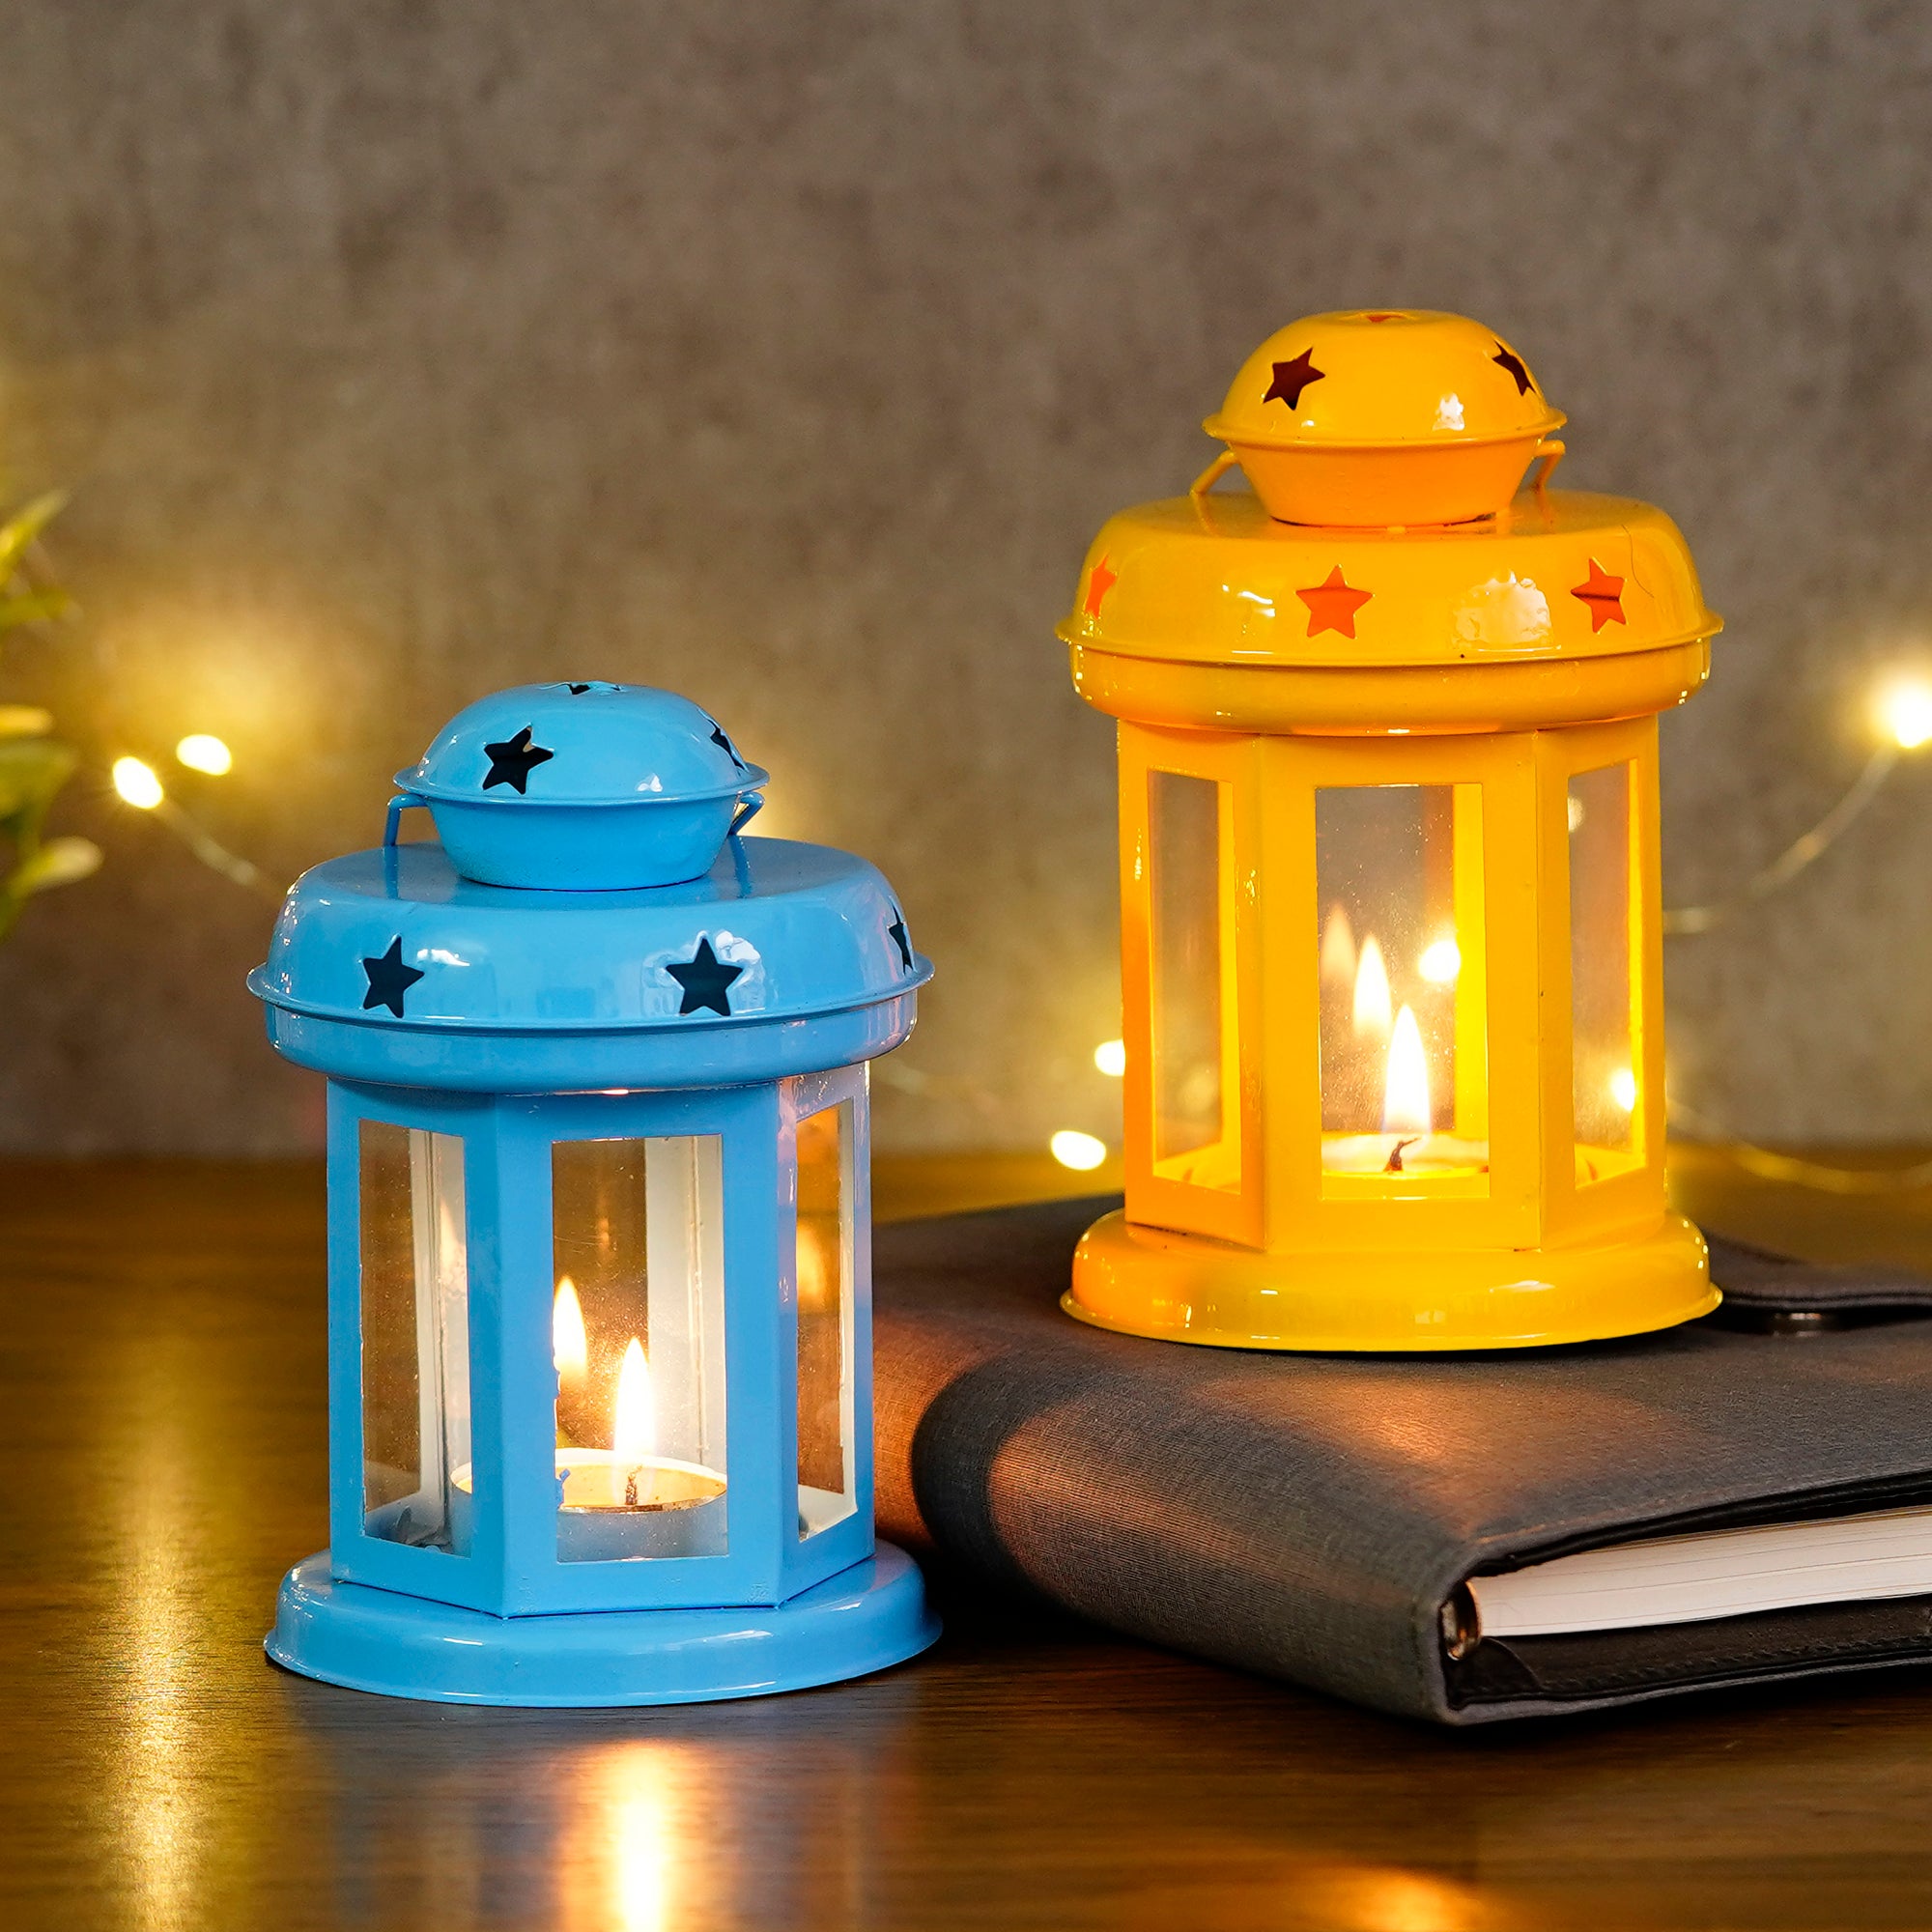 Set of 2 Blue and Yellow Metal hanging Tea Light Candle Holder Lantern with Tealight Candle